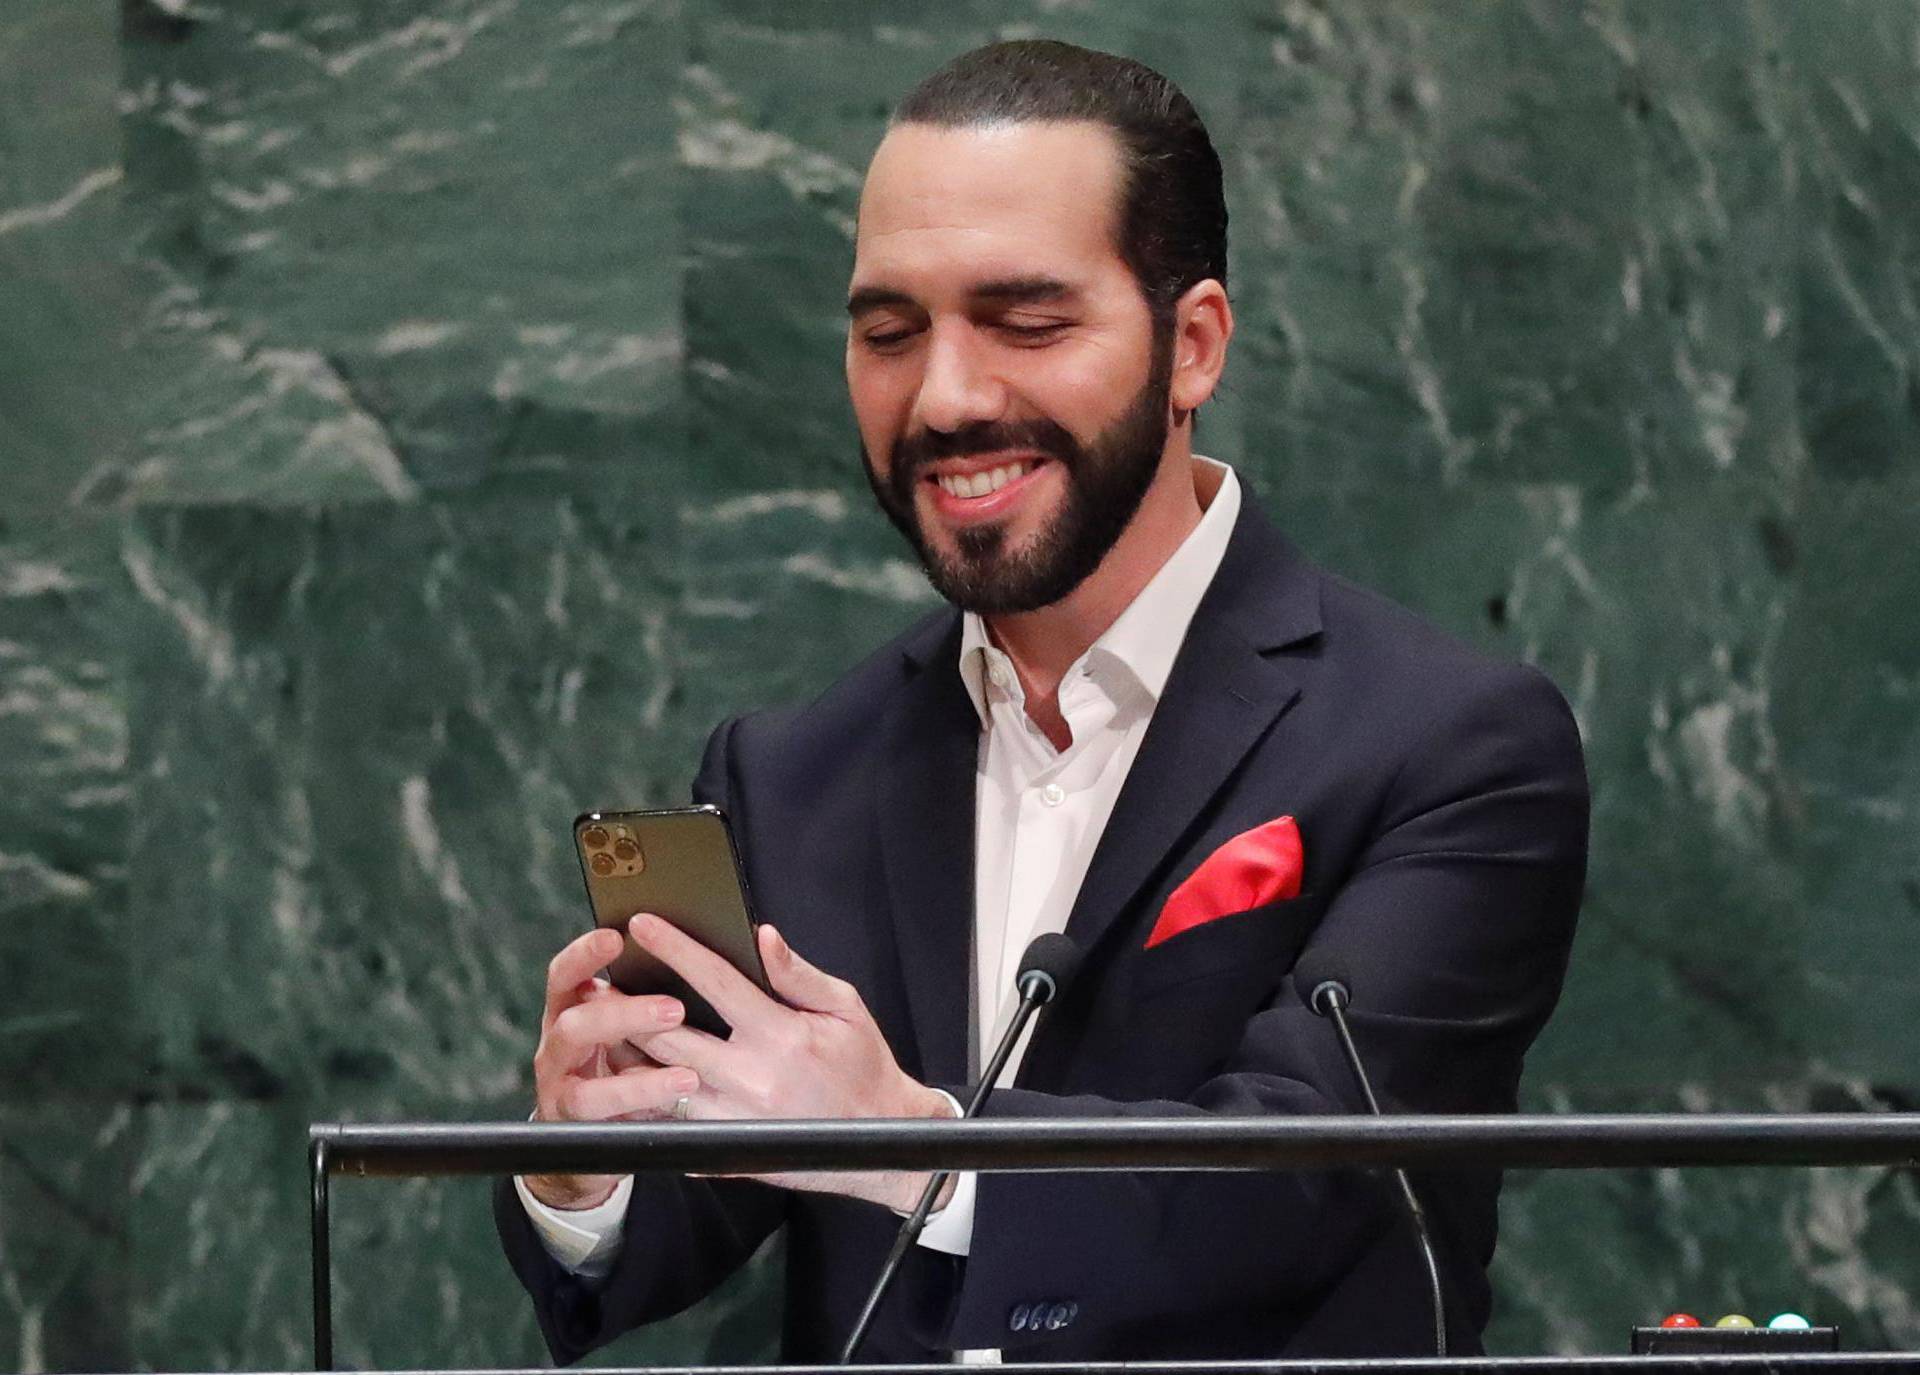 Nayib Bukele, President of El Salvador takes a selfie before addressing the 74th session of the United Nations General Assembly at U.N. headquarters in New York City